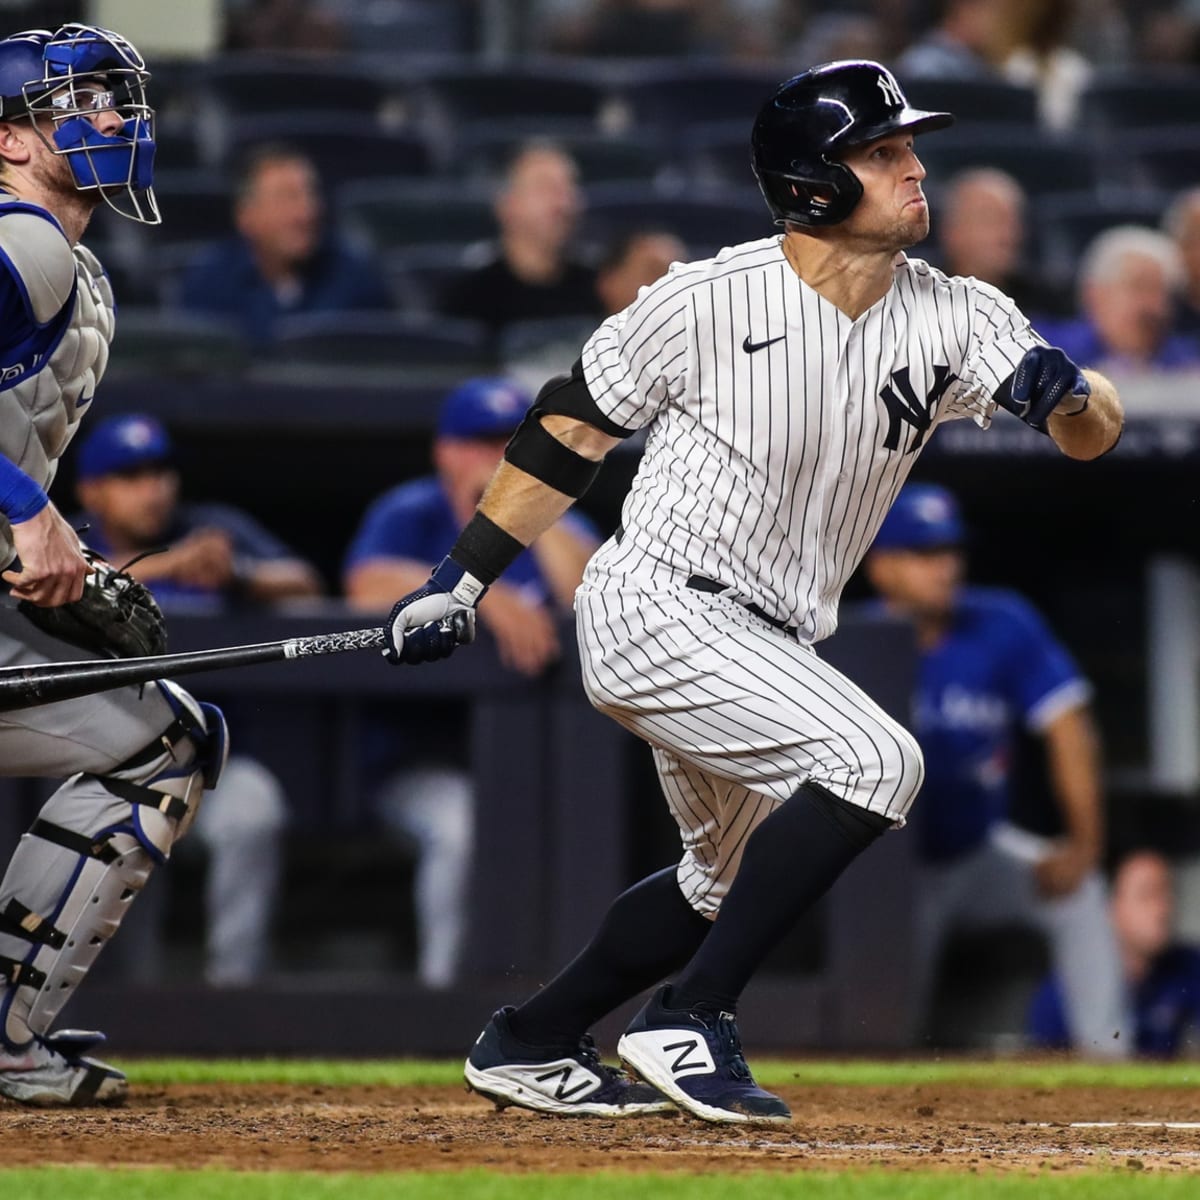 The Yankees need more outfiel yankees 4 jersey d depth than just Brett  Gardner